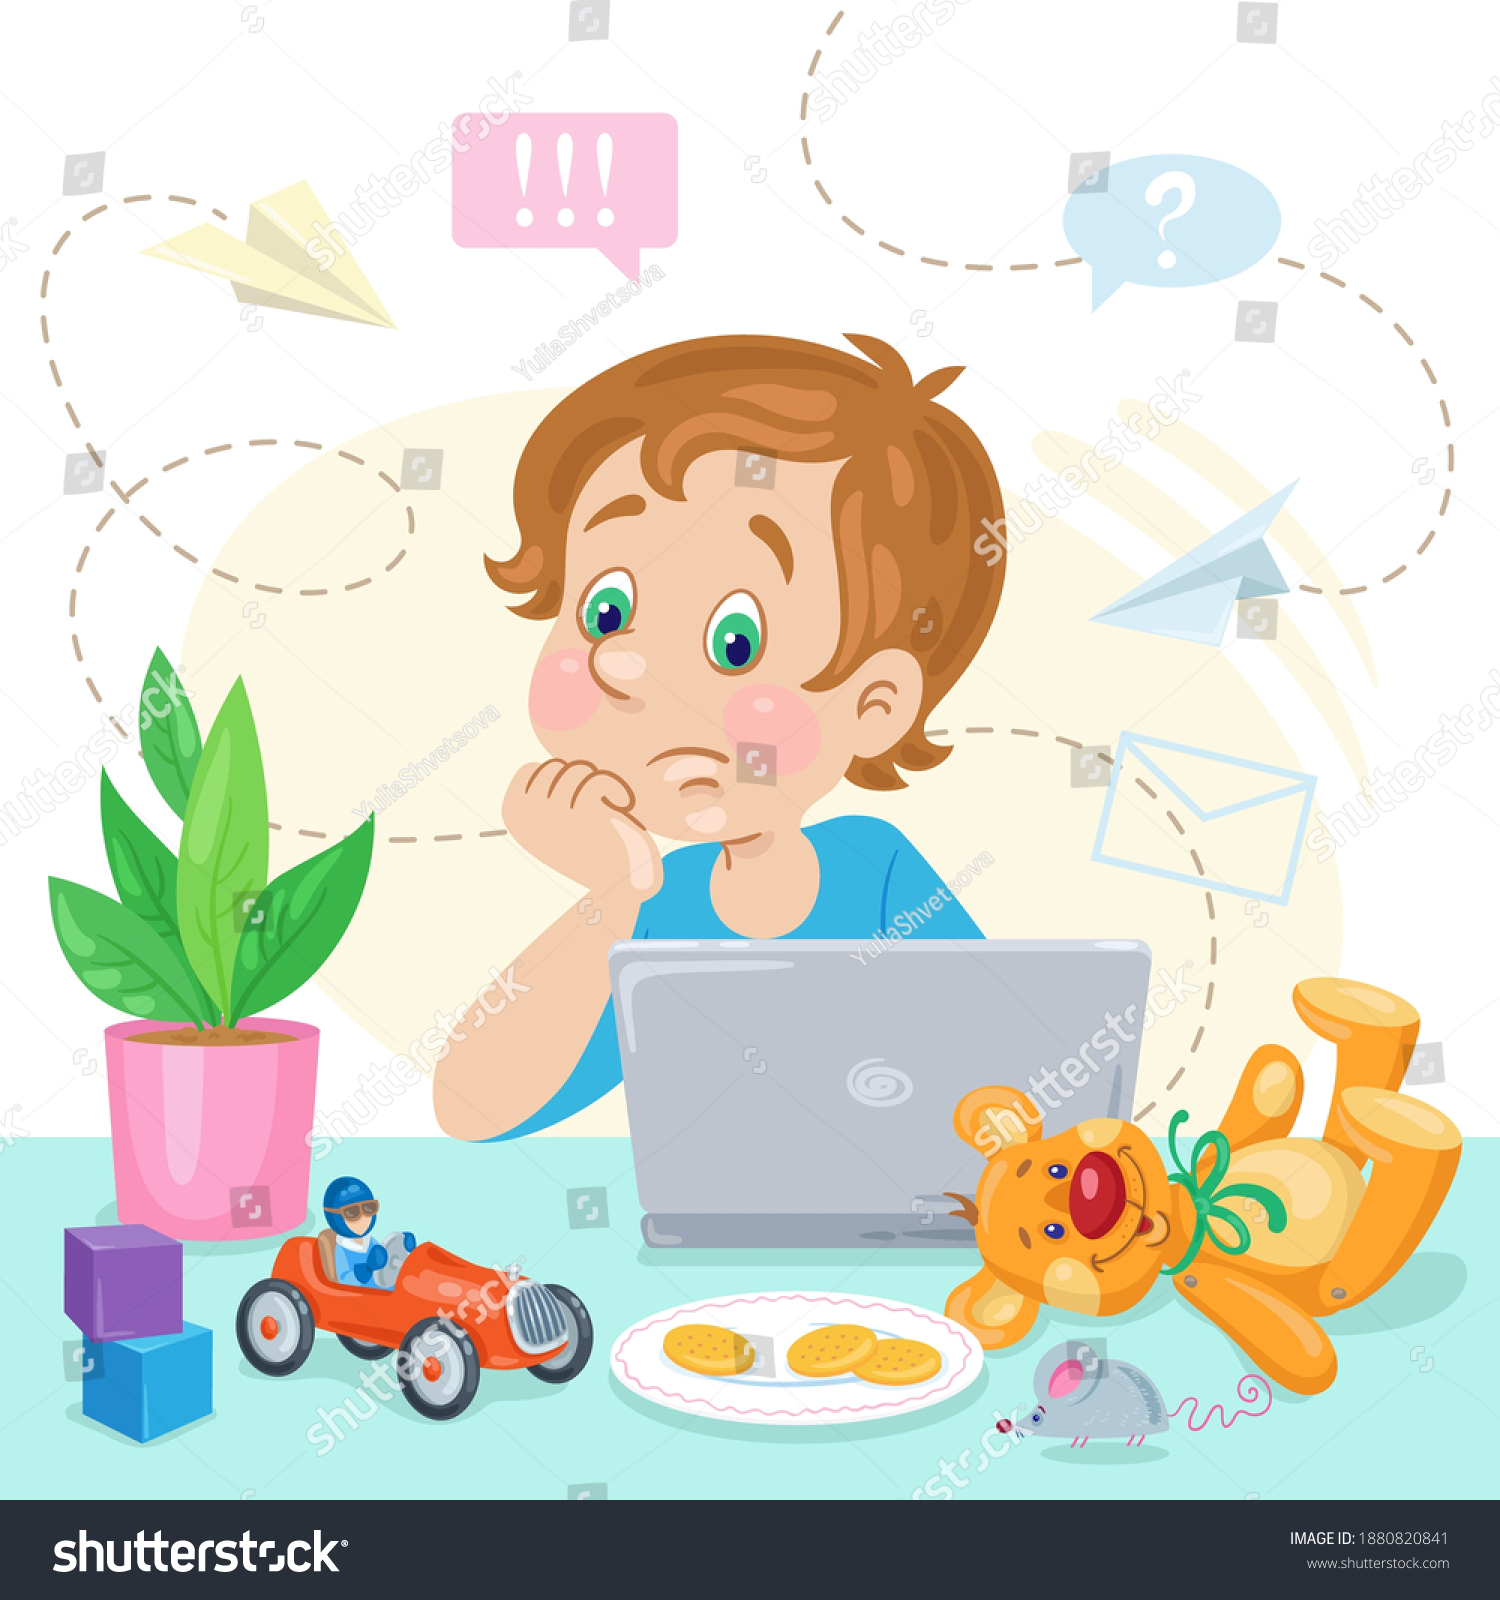 SVG of Online education for children. Puzzled boy with laptop, biscuits and toys. In cartoon style. Isolated on white background. Vector flat illustration. svg